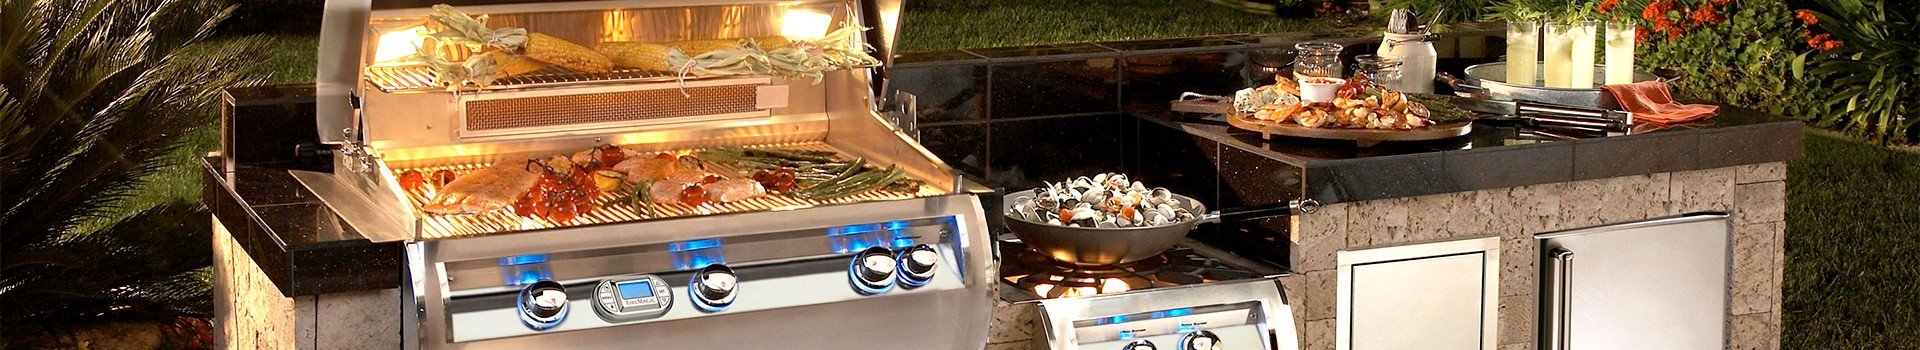 Built-in barbecues at barbecueportugal.com